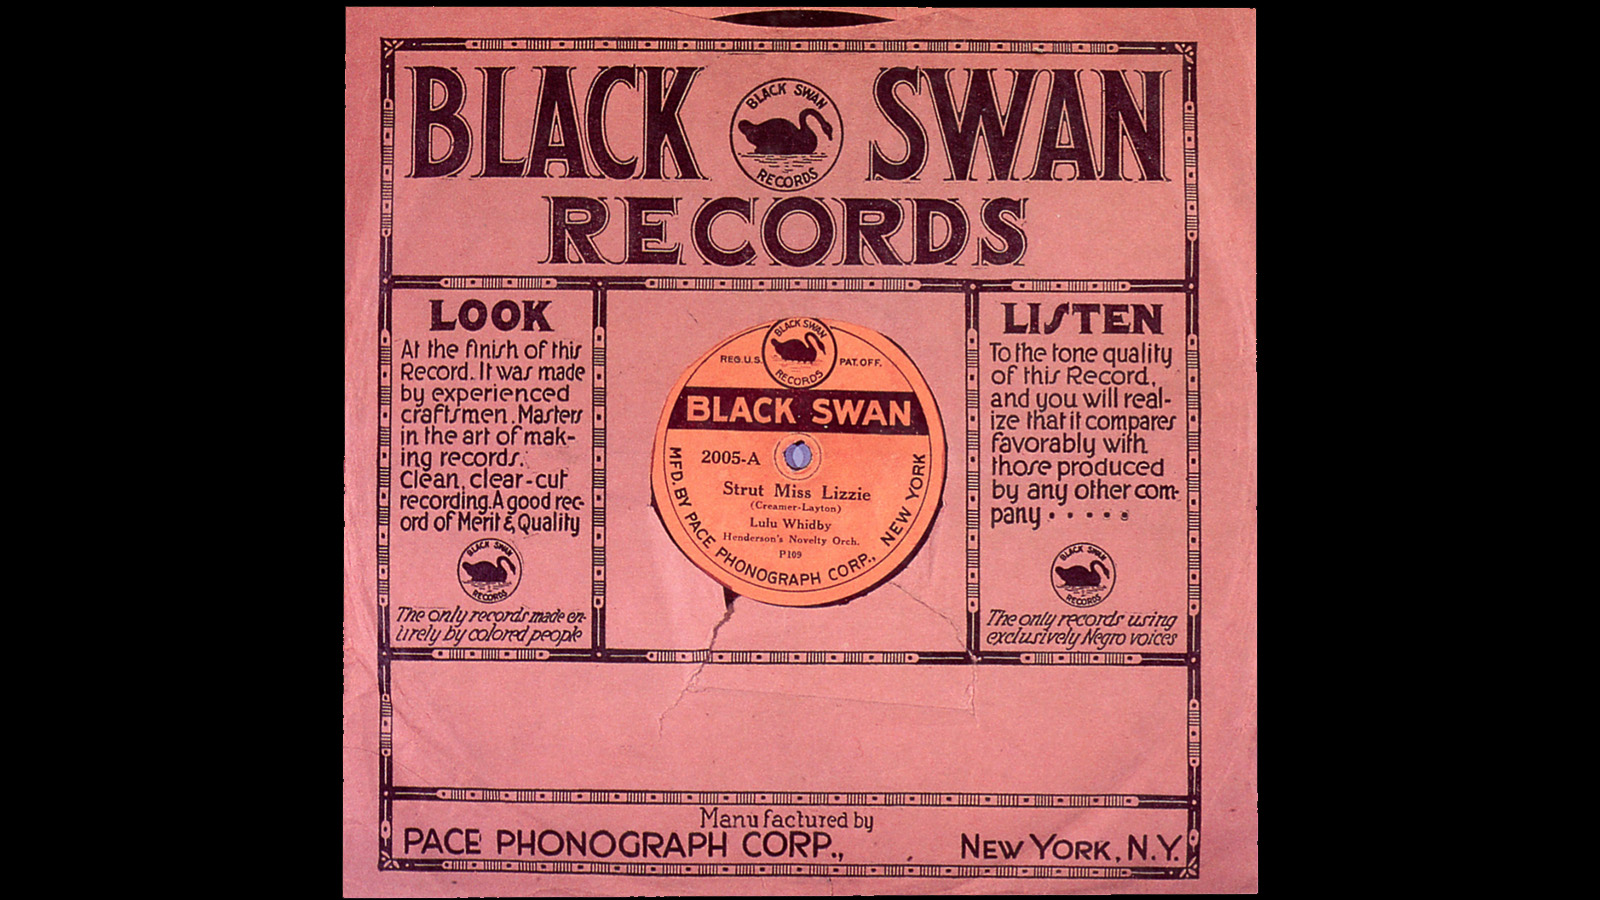 A photo of a record inside of a record sleeve. The sleeve says “Black Swan Records” in large black print at the top; the image of a Black swan in a circle is nestled within the record label wording. The open circle of the sleeve shows a light orange label for a song “Strut Miss Lizzie” by Lulu Whidby. 